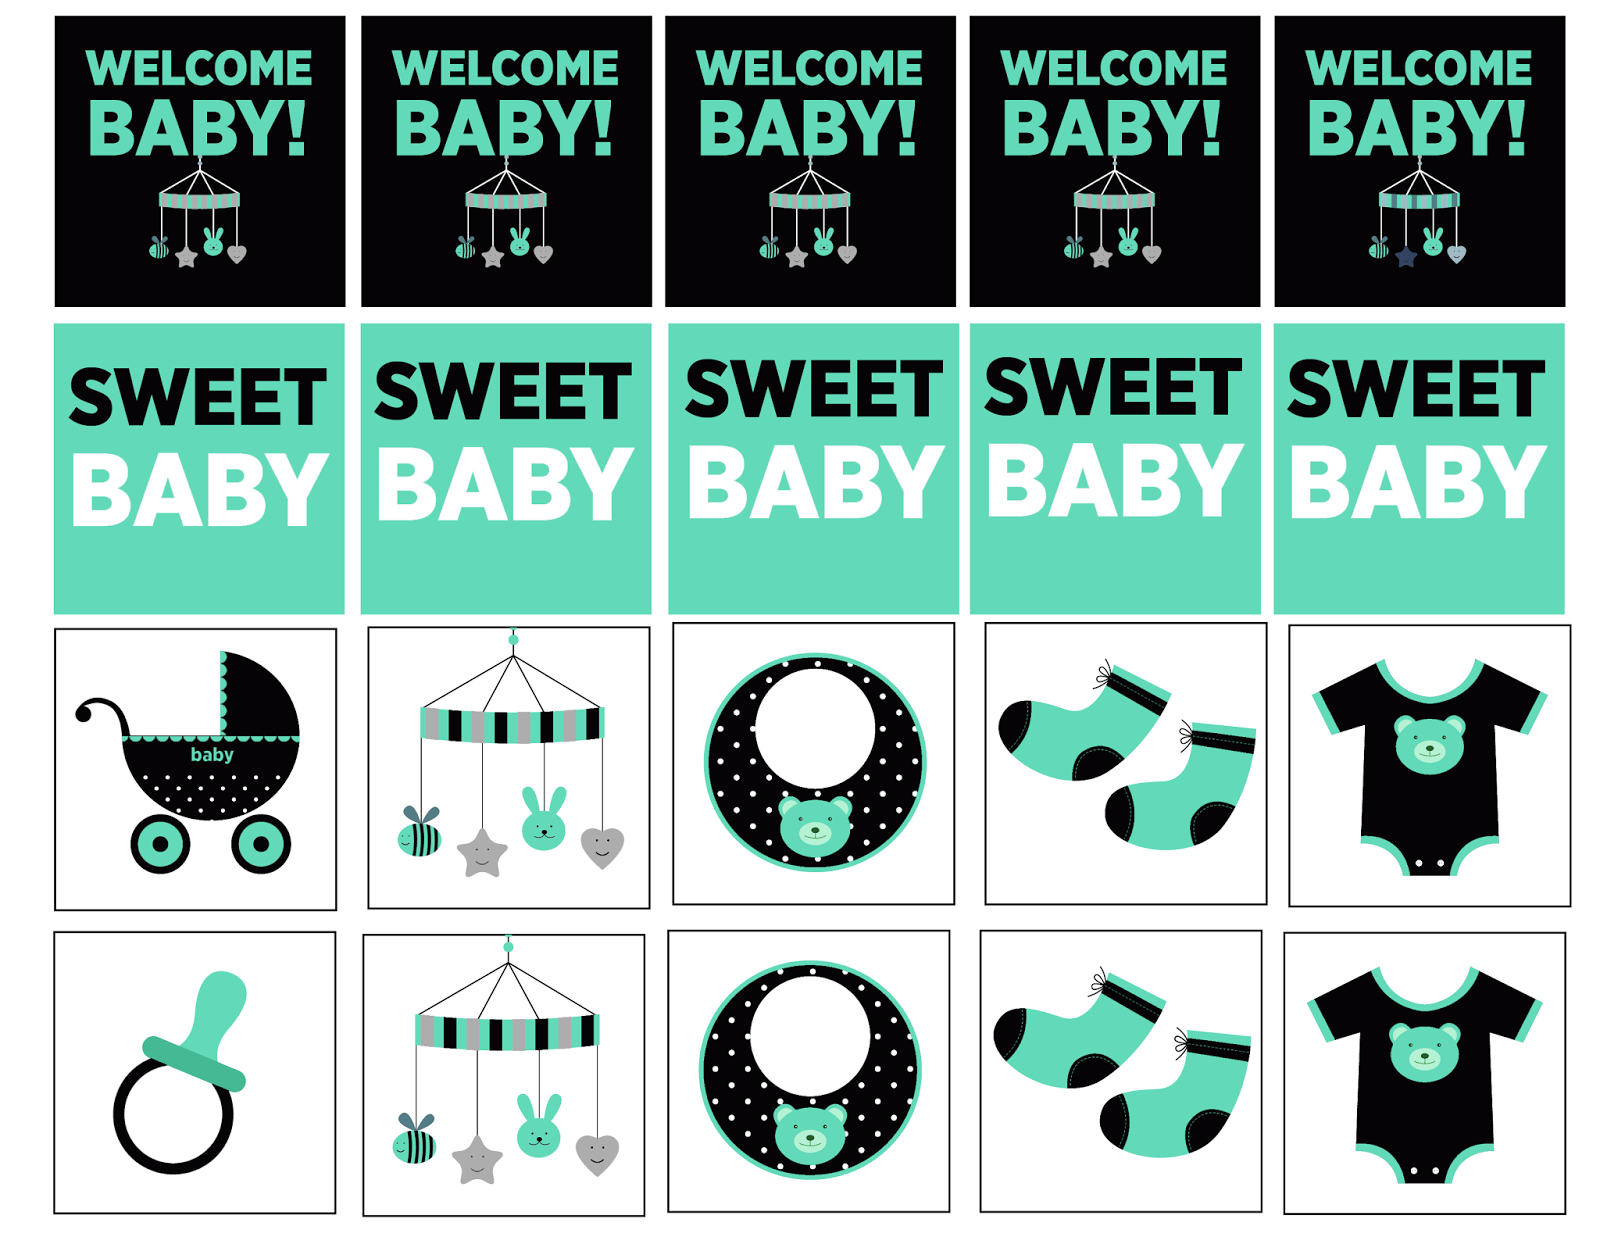 “SWEET BABY” letters